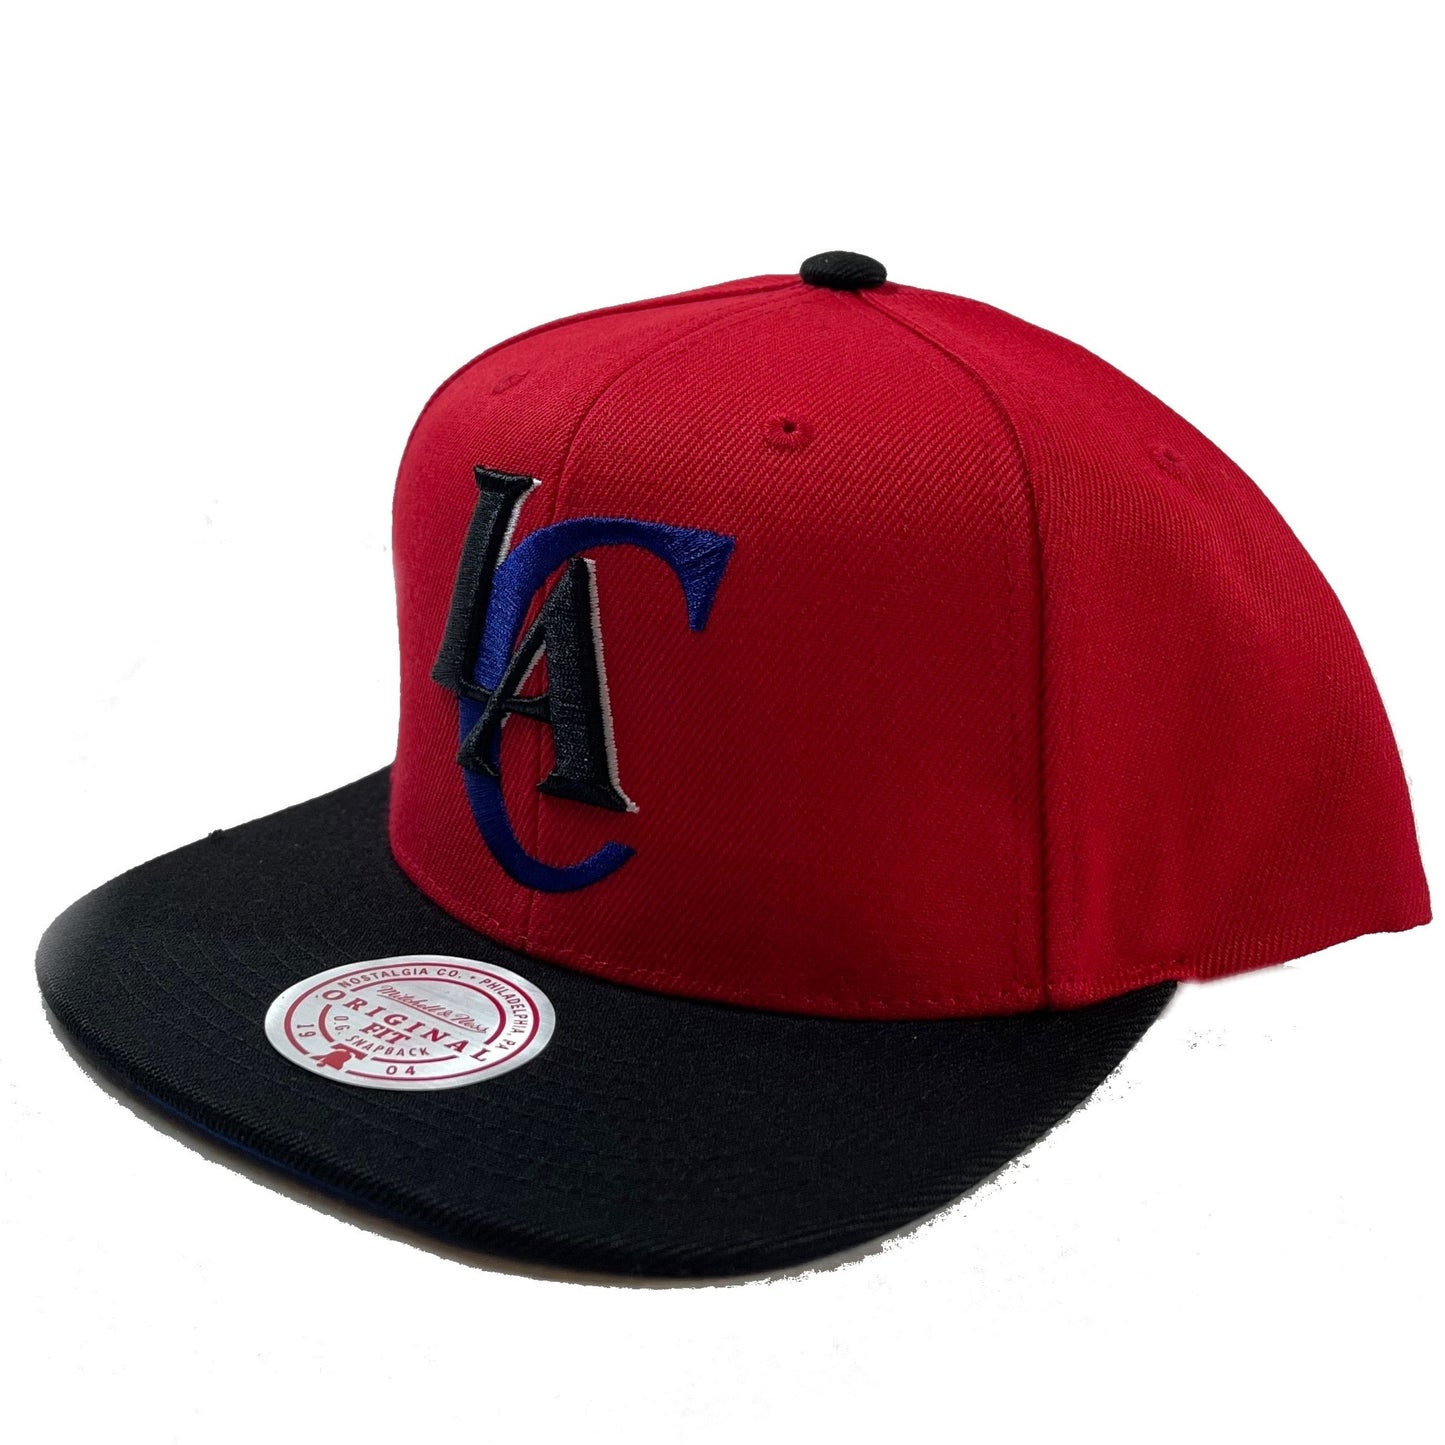 Los Angeles Clippers (Red) Snapback